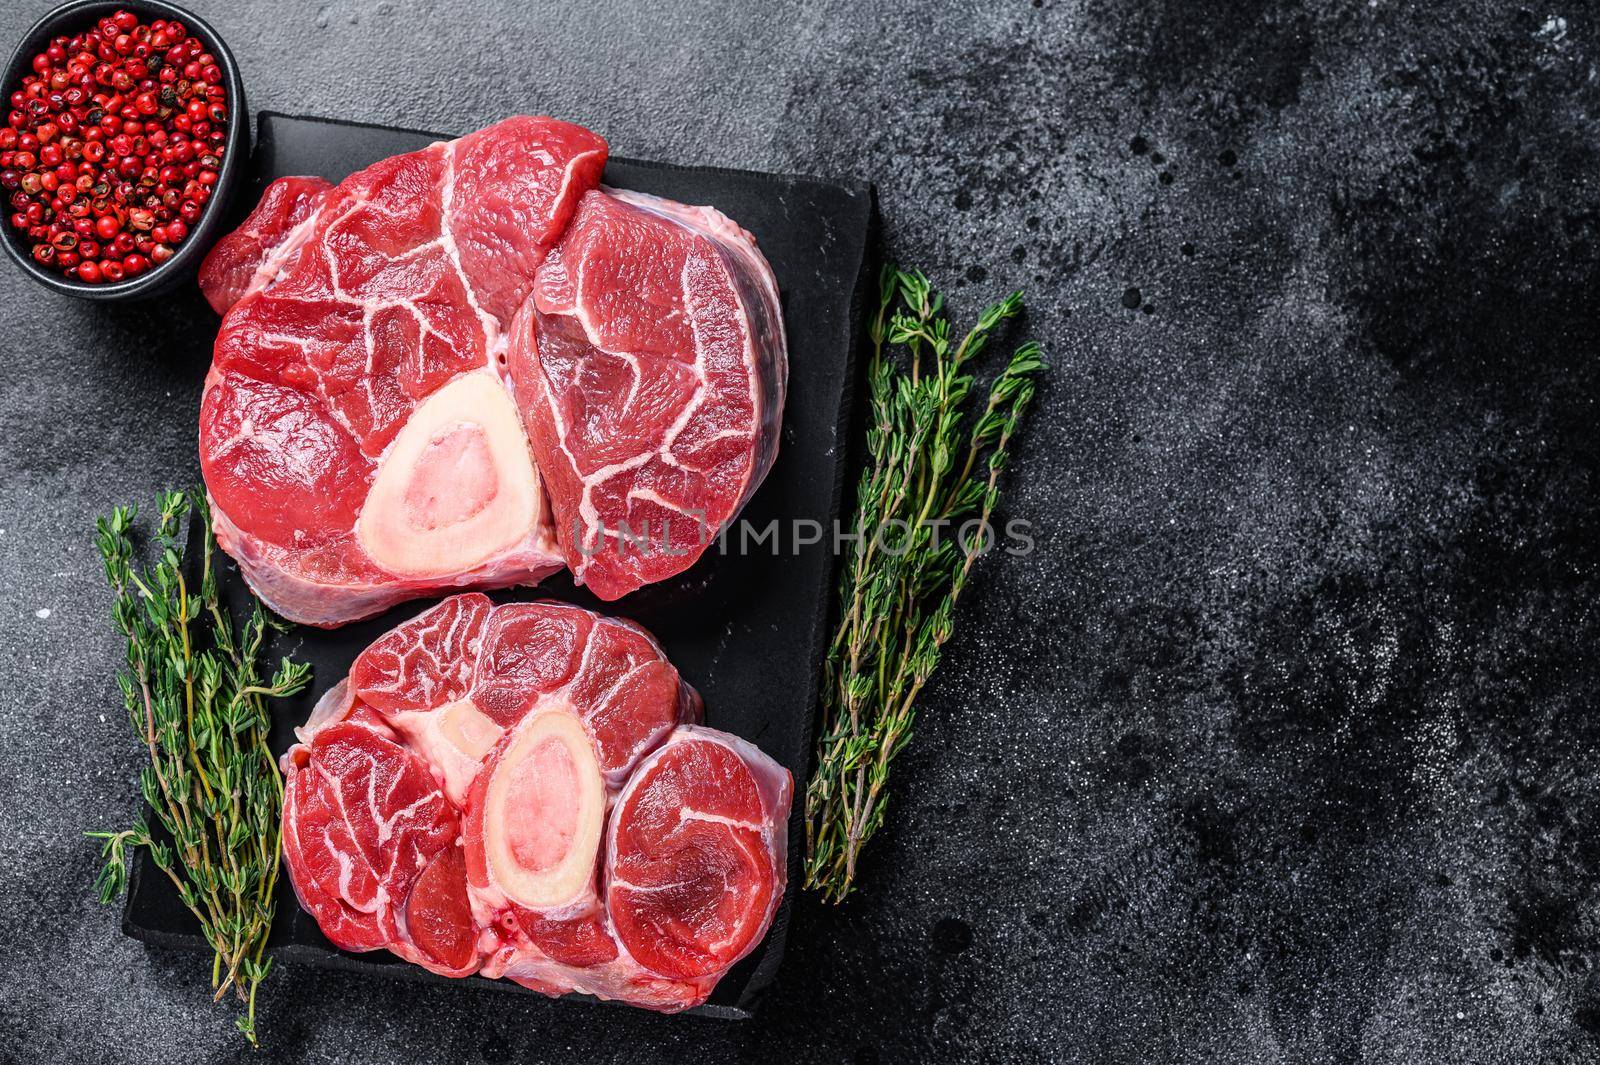 Raw beef meat osso buco shank steak, italian ossobuco. Black background. Top view. Copy space.